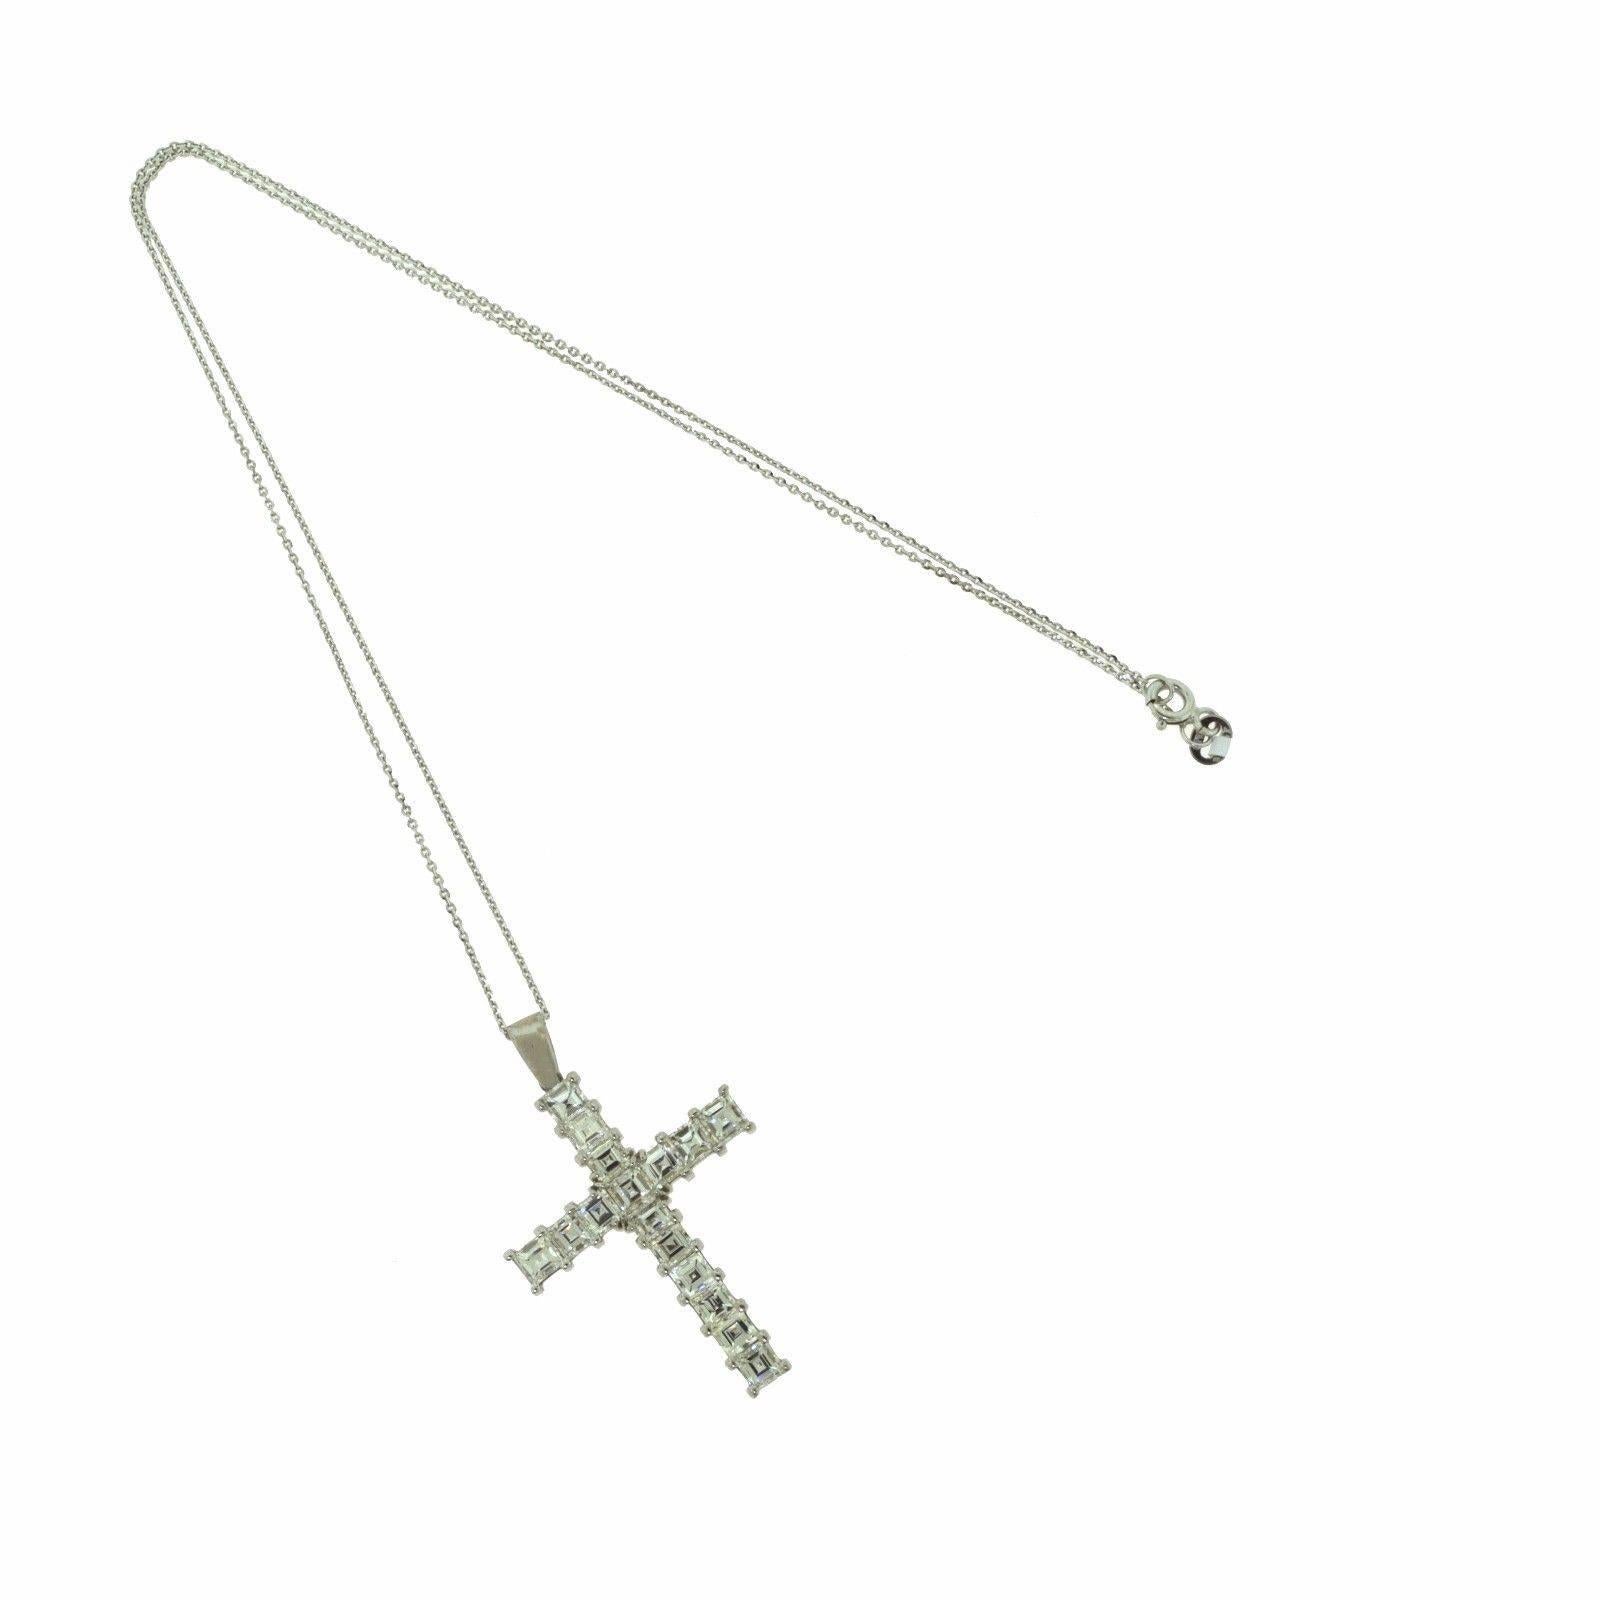 Beautifully crafted, this impressive diamond cross pendant showcases 4.38 carats of Princess diamonds set in a classic 18k white gold design with a versatile chain handcrafted in 14k white gold.

Item Specifications:
Style: Diamond Cross